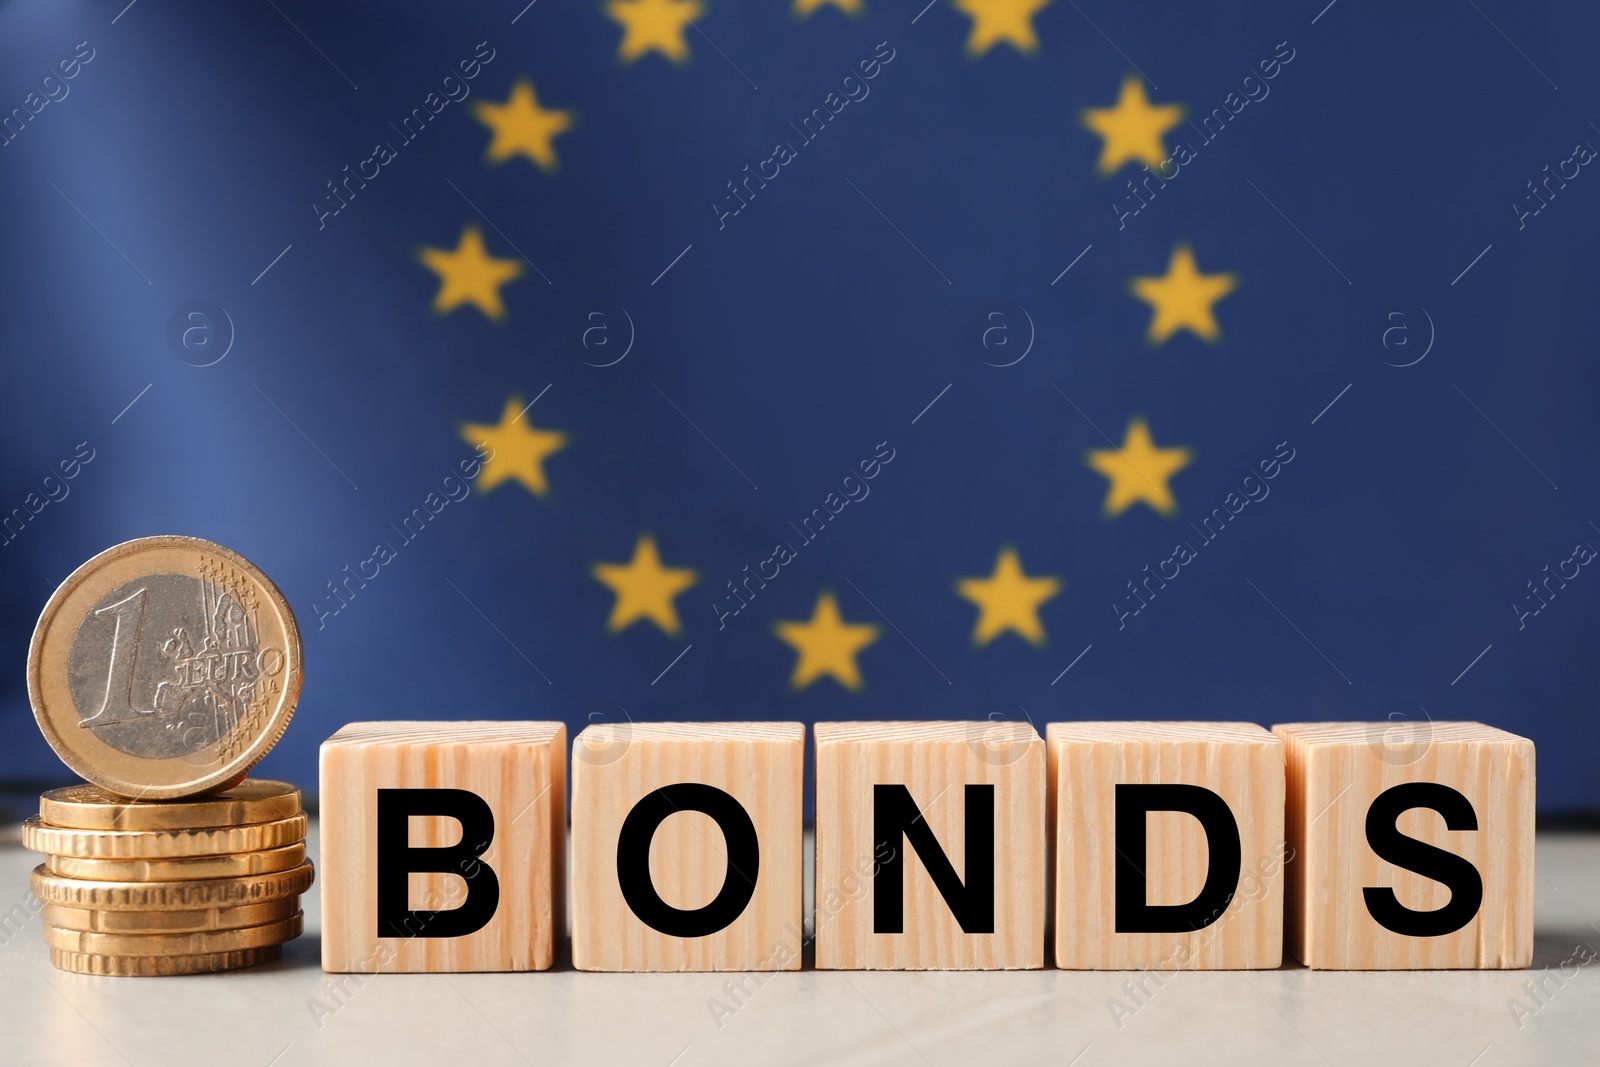 Photo of Word Bonds made of wooden cubes with letters and stacked coins against European union flag